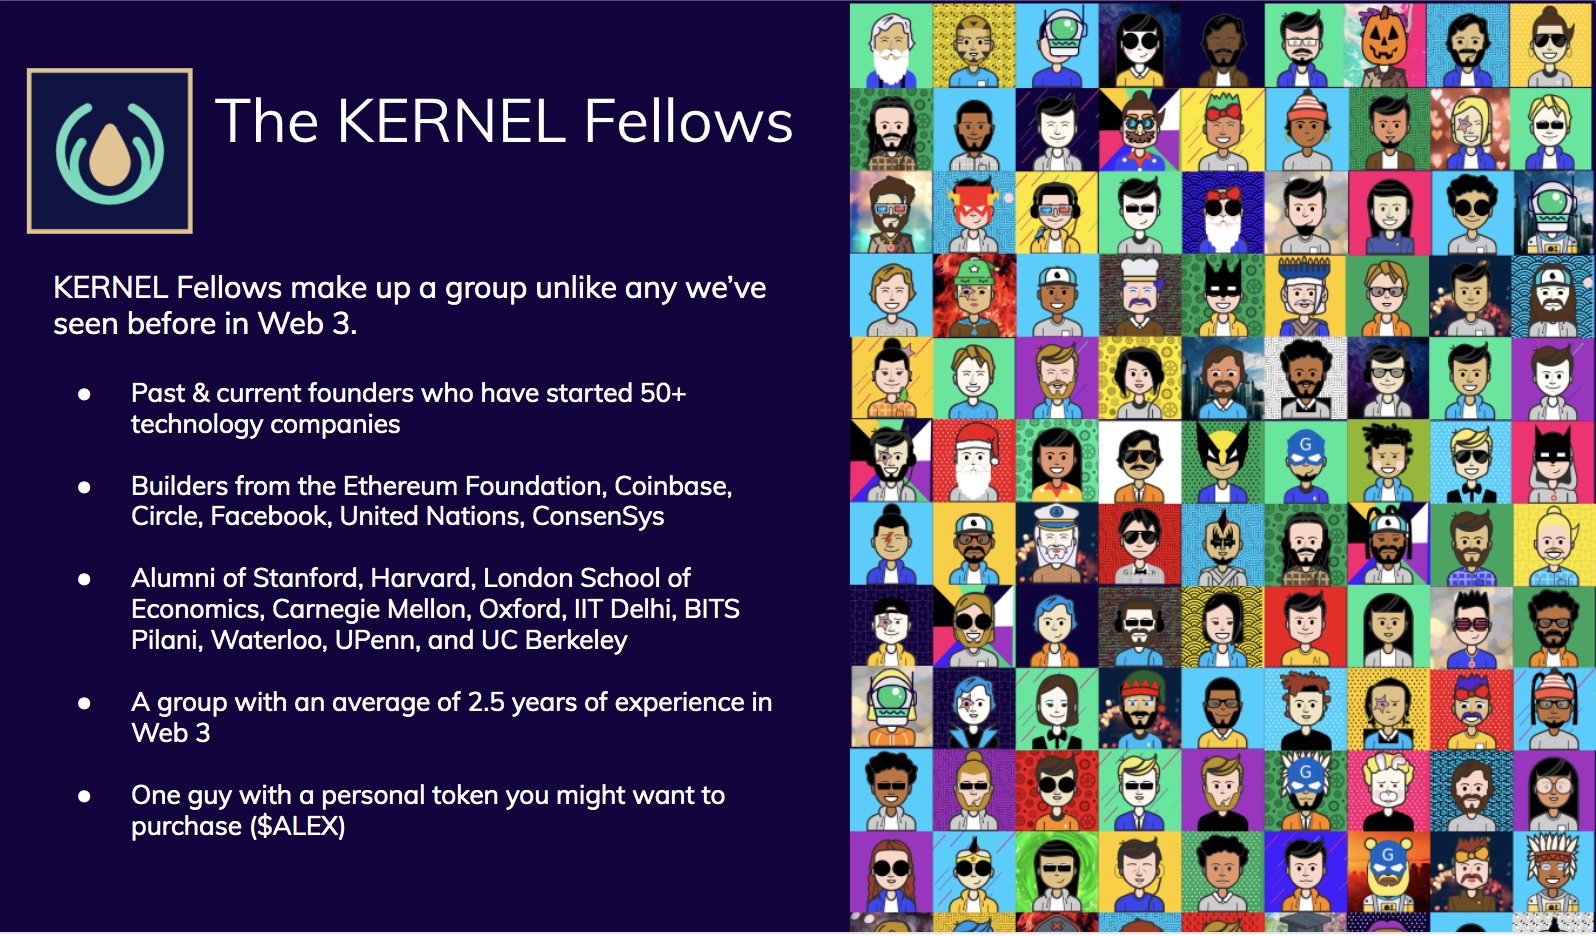 Kernel on X: KERNEL is made up of unique, incredible individuals. Genesis  Block included 200 builders from 48 countries building 75 Web 3 startups,  open source projects, and educational resources. The relationships